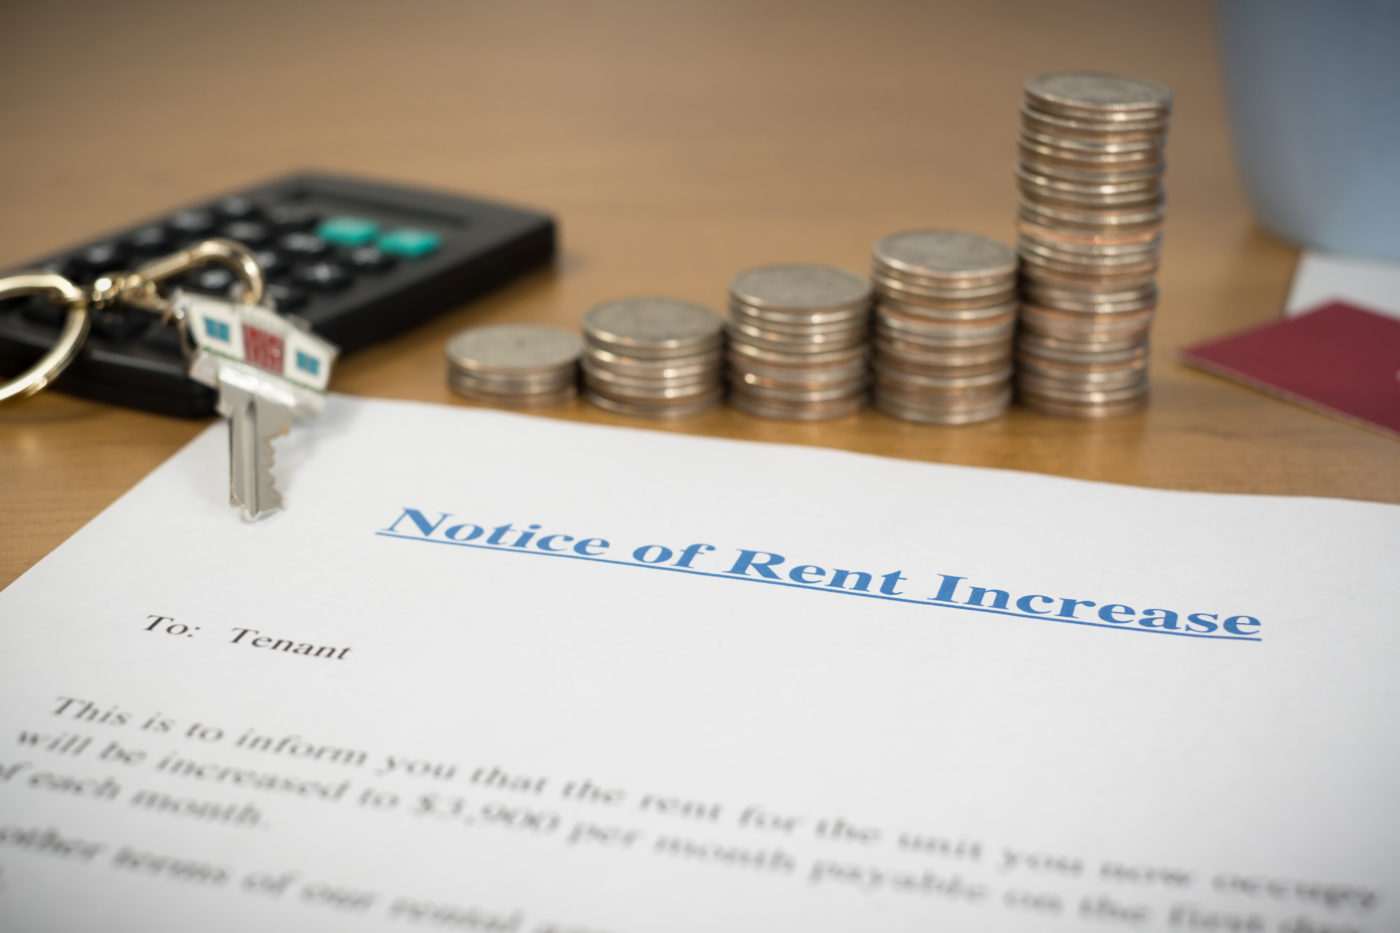 Housing Rent Increases Over 10 Are Illegal in California Due to State